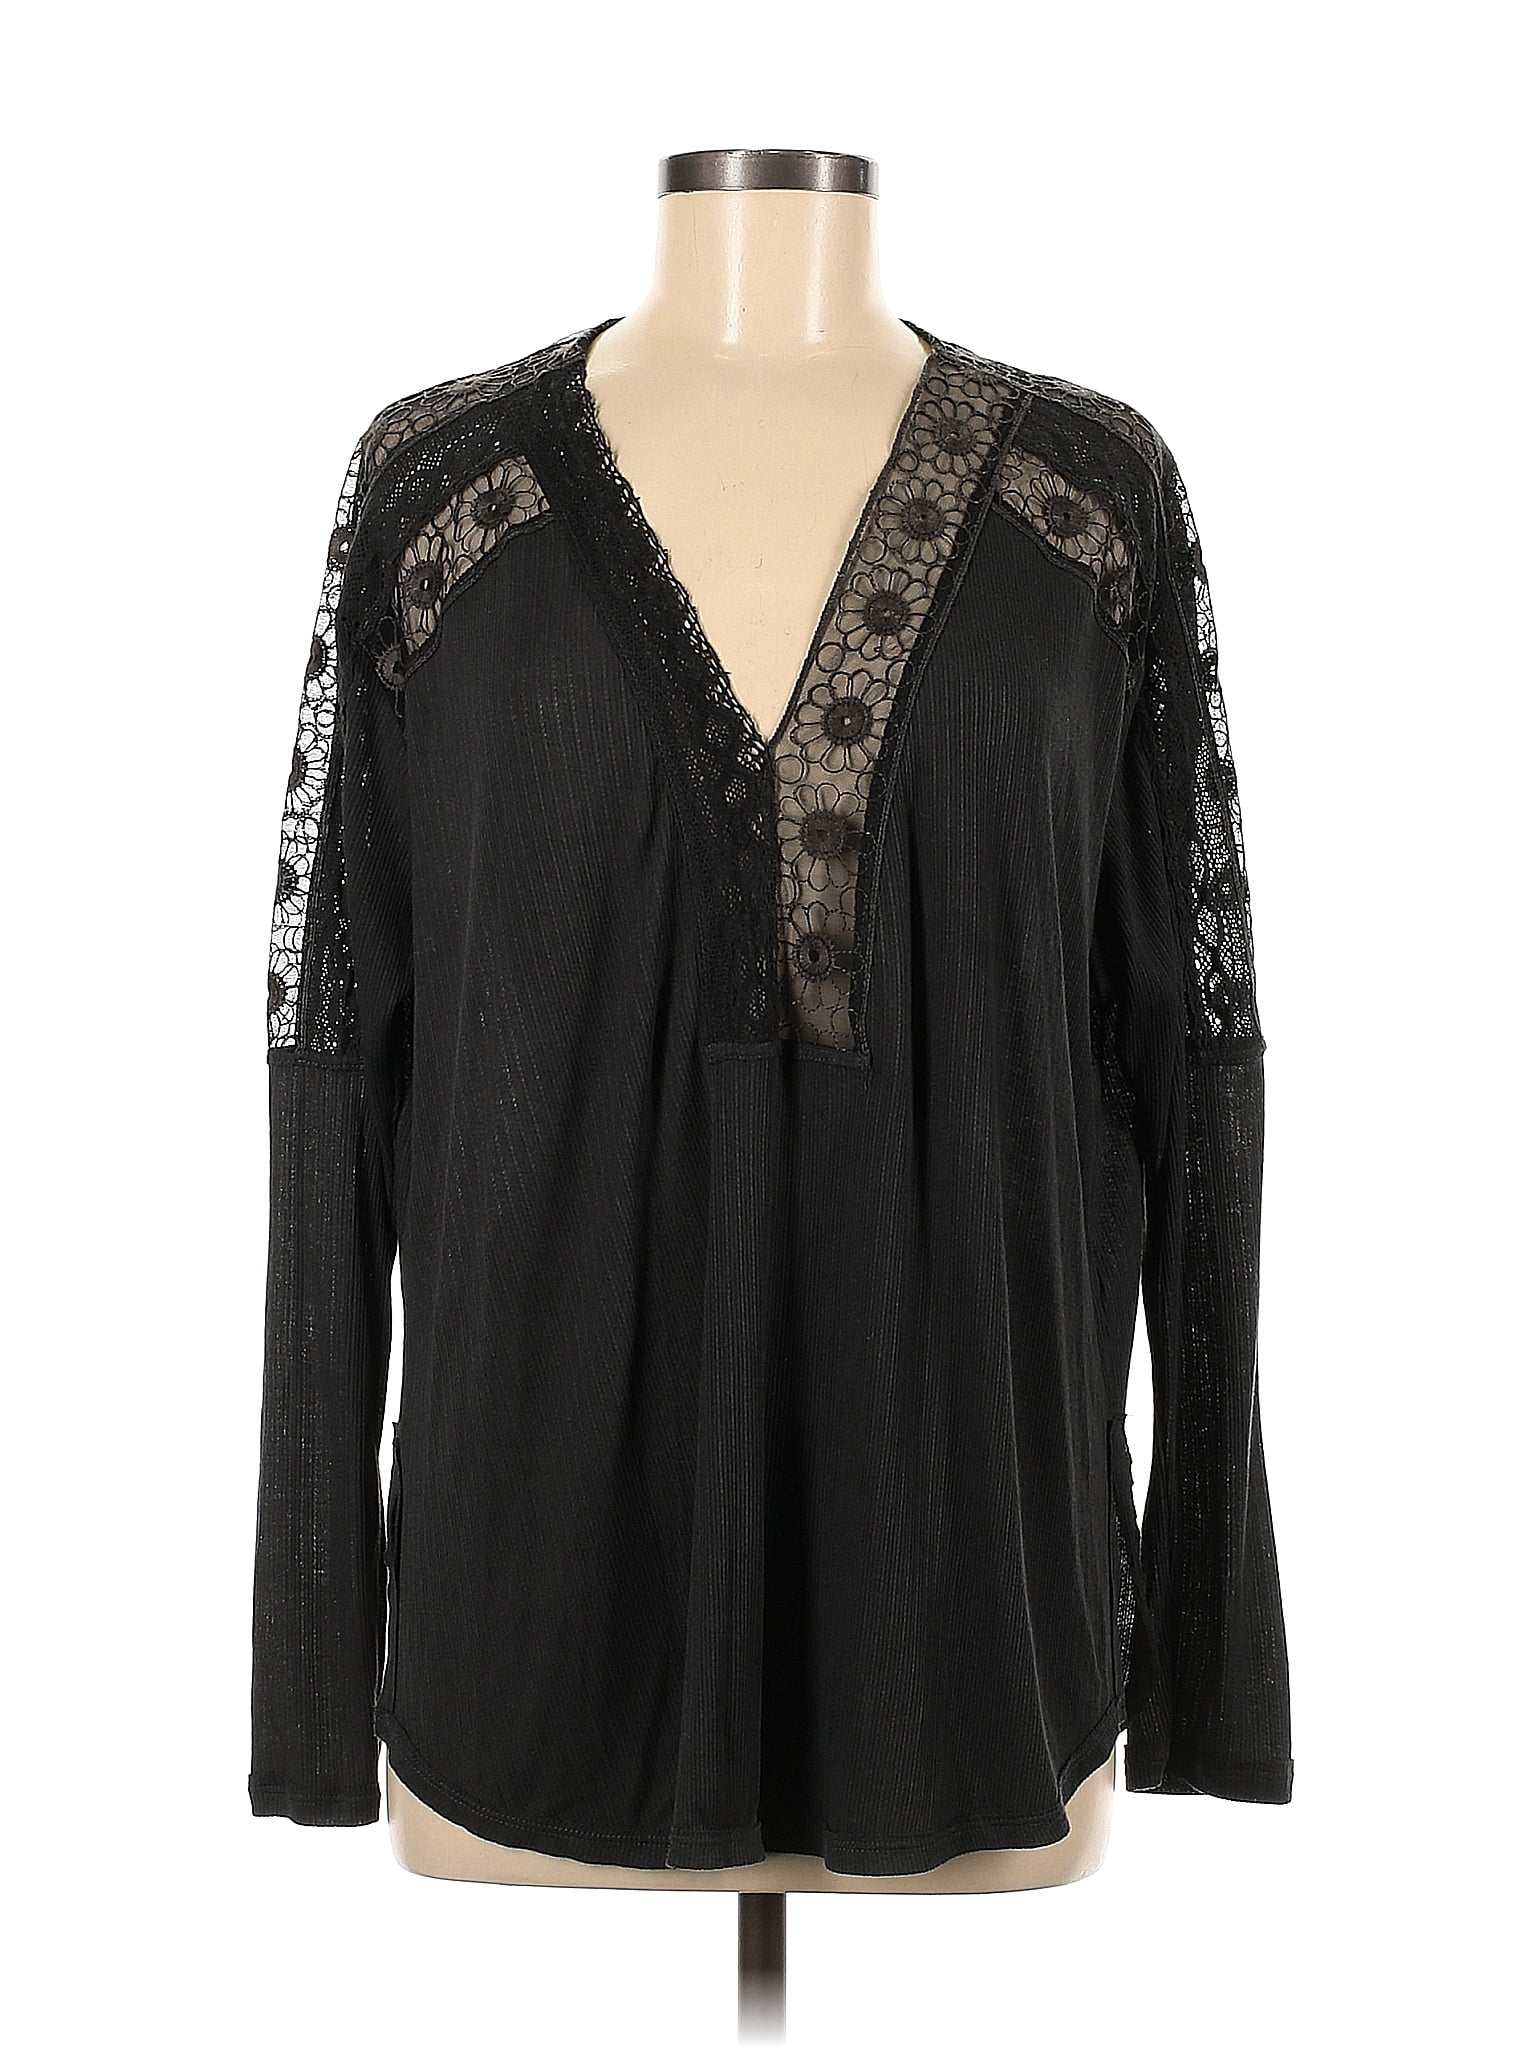 Free People Black Long Sleeve Top Size M - 57% off